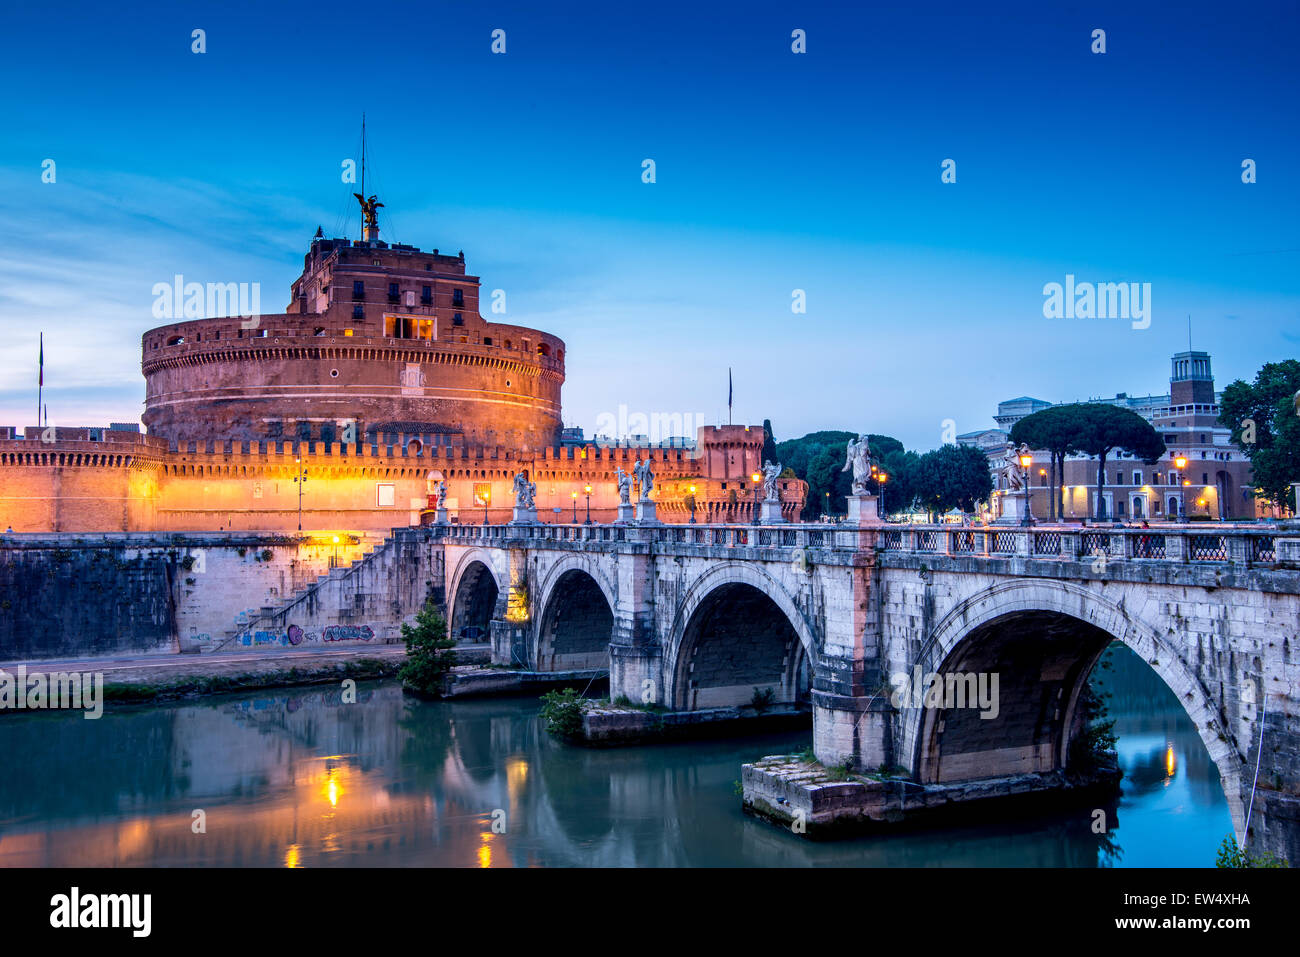 castel sant'angelo on the banks of the RIver Tiber in Rome.  Built by Emperor Hadrian as his mausoleum Stock Photo